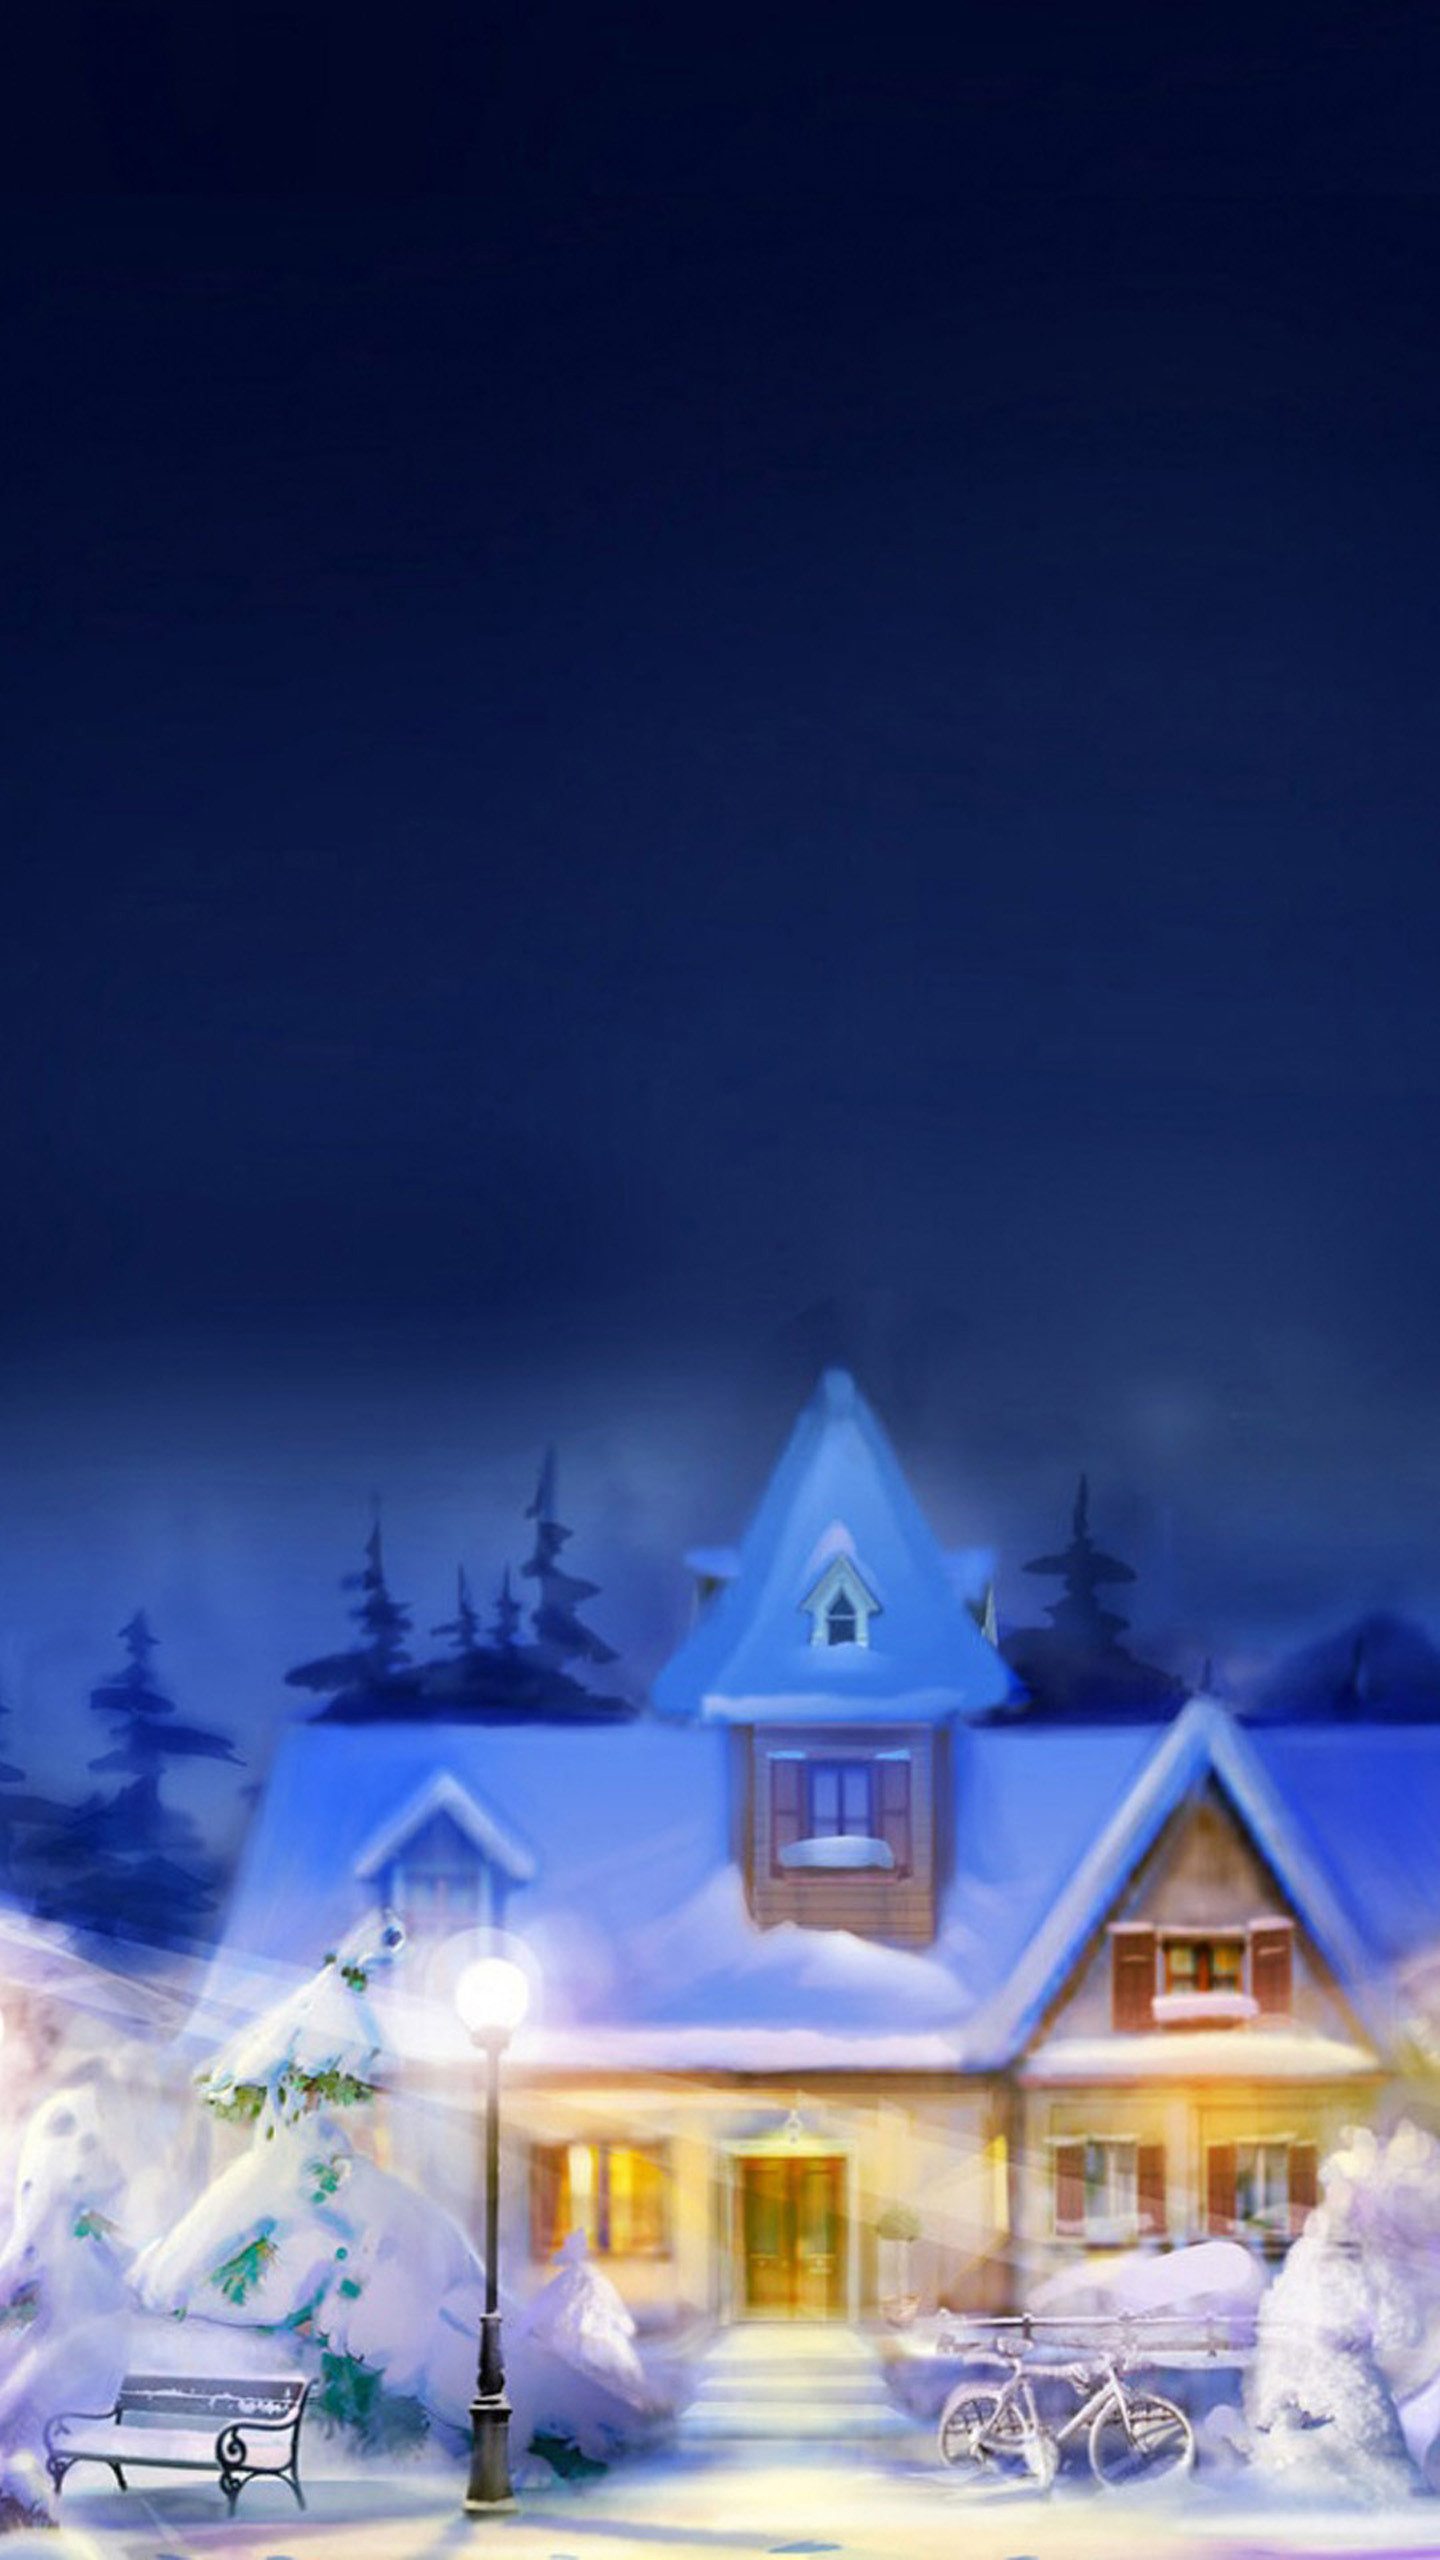 1440x2560 Christmas Eve Town LG G3 Wallpapers